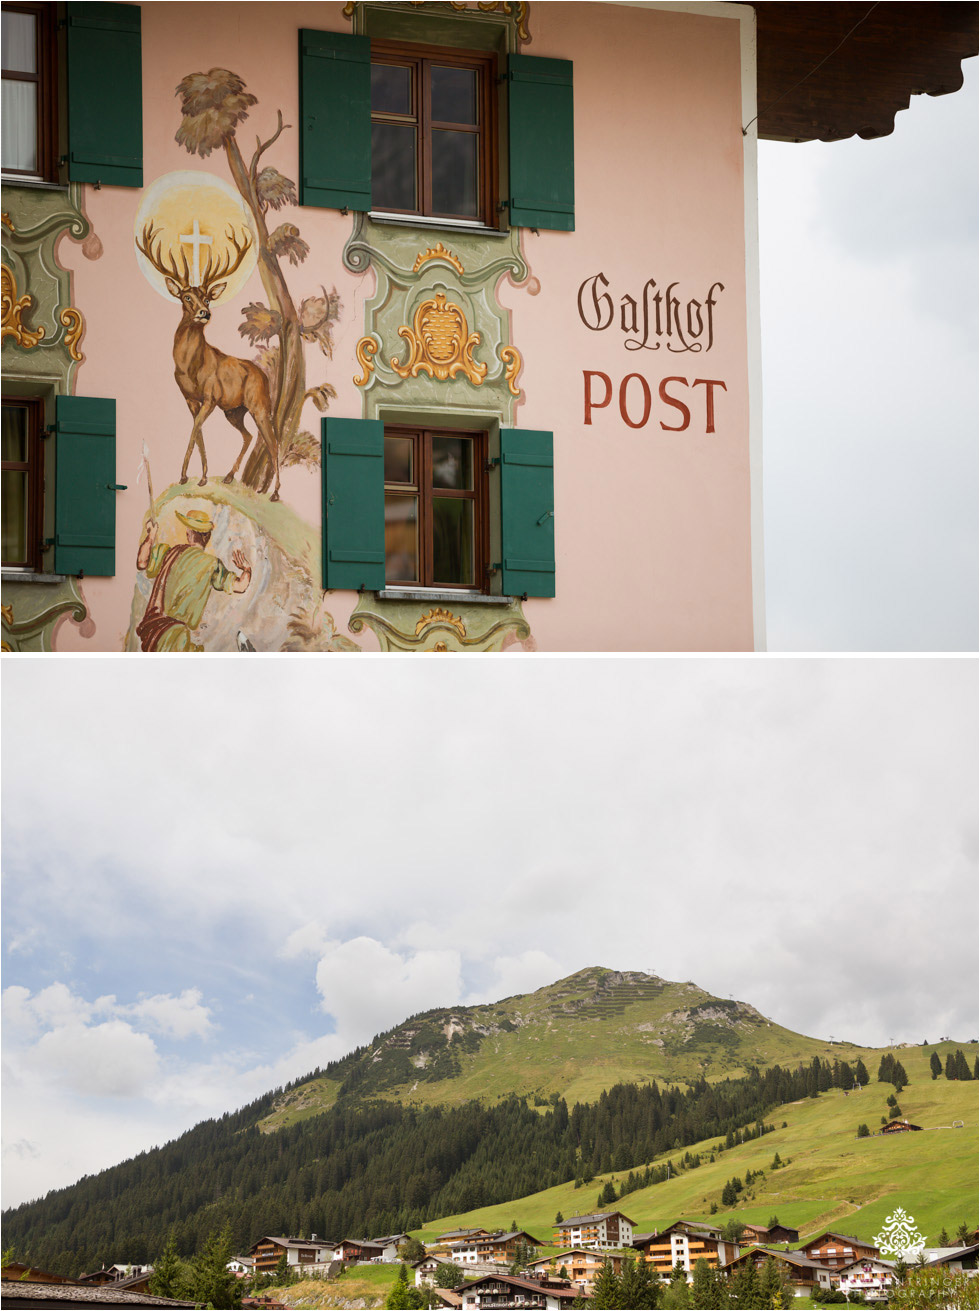 Arlberg Wedding at Gasthof Post, Lech and Hospiz Alm, St. Christoph | Stag & Butterfly Theme - Blog of Nina Hintringer Photography - Wedding Photography, Wedding Reportage and Destination Weddings